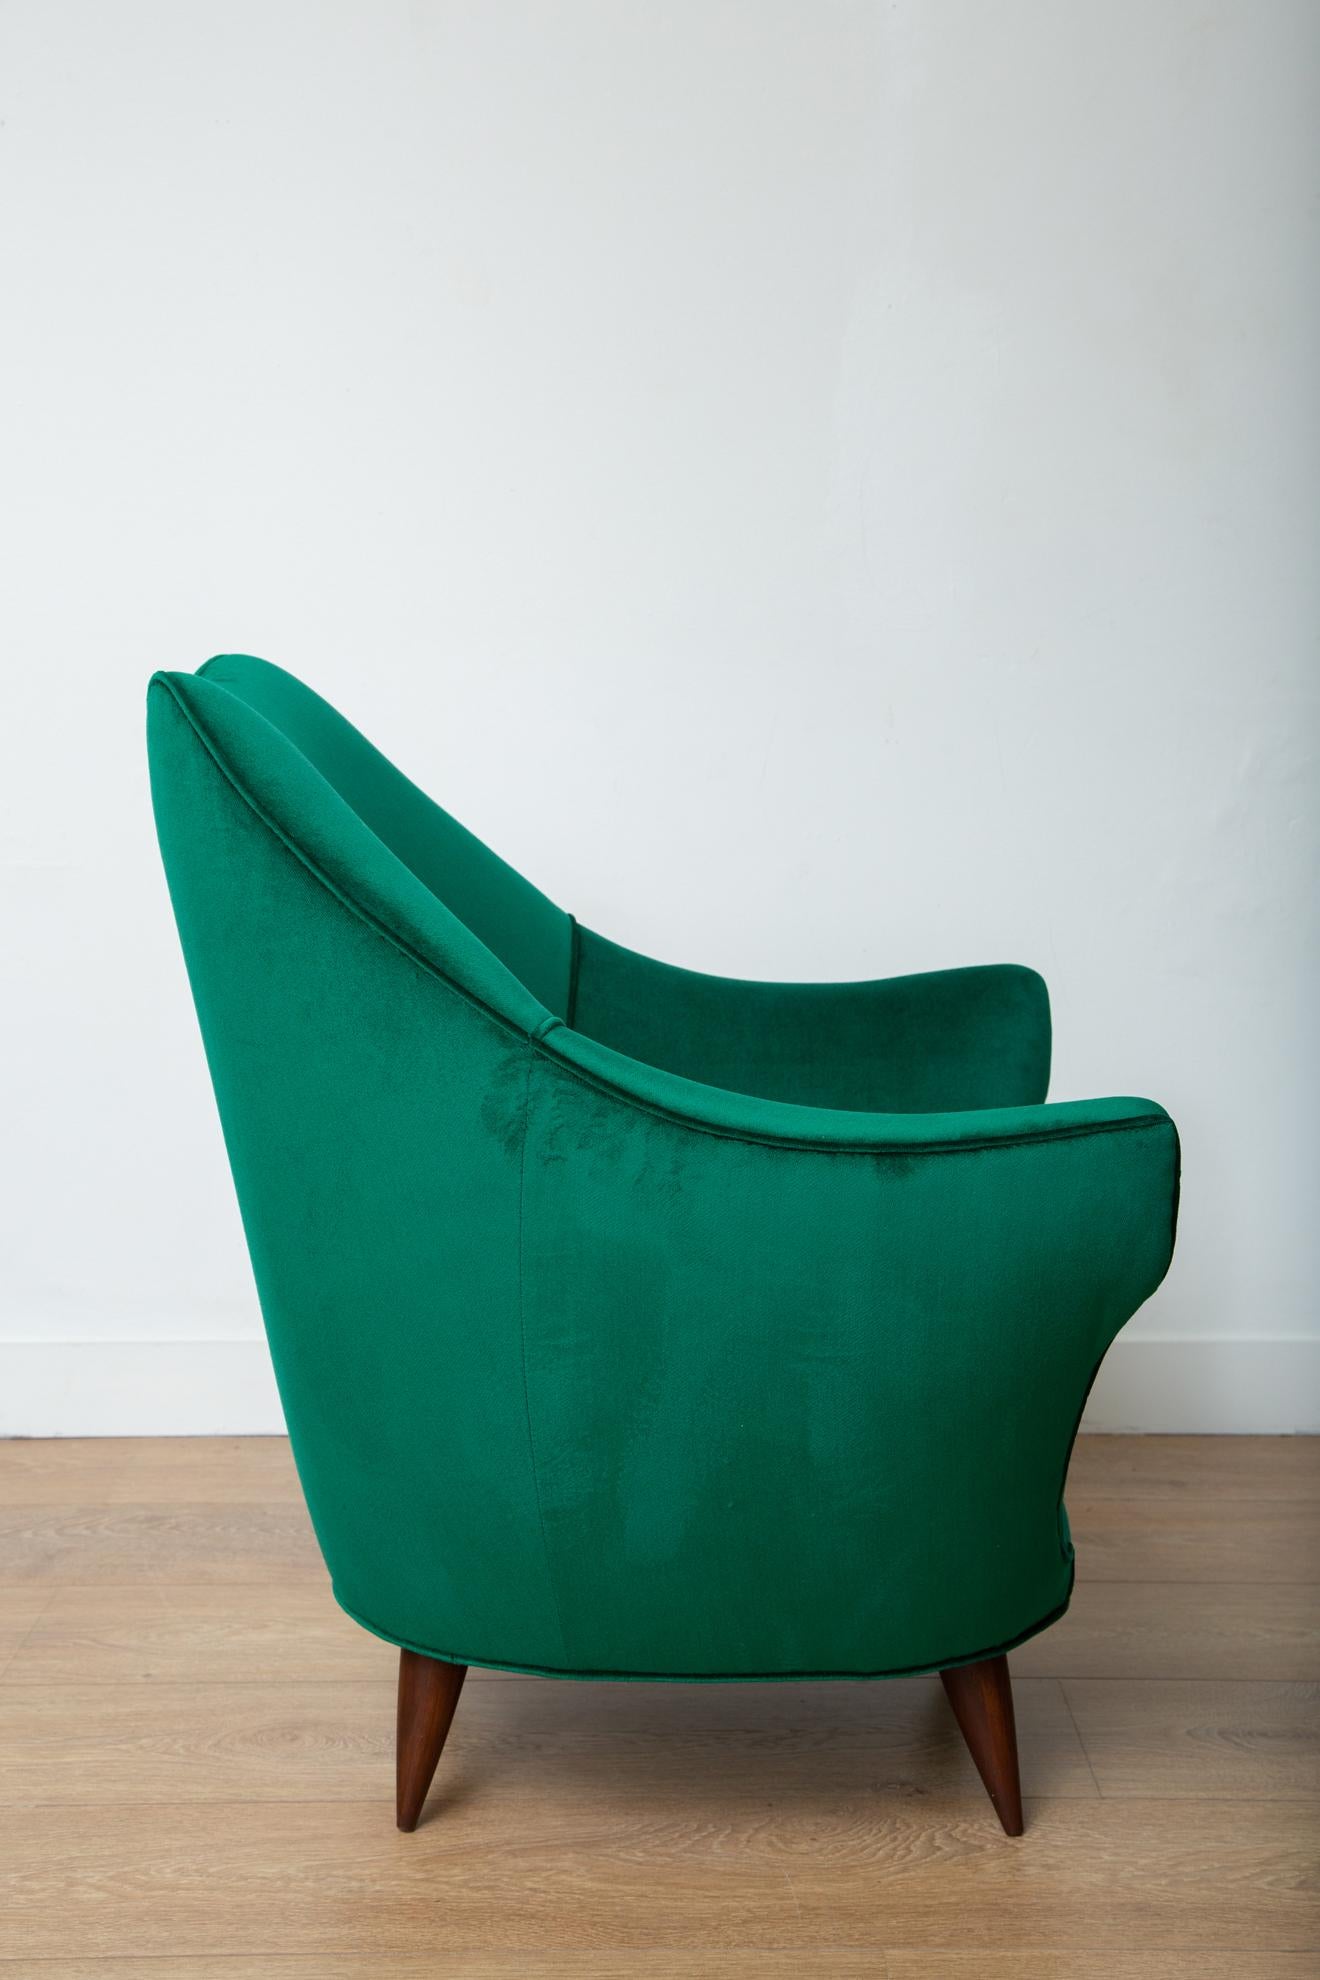 20th Century Pair of Mid-Century Modern Italian Lounge Chairs in Emerald Green Velvet For Sale